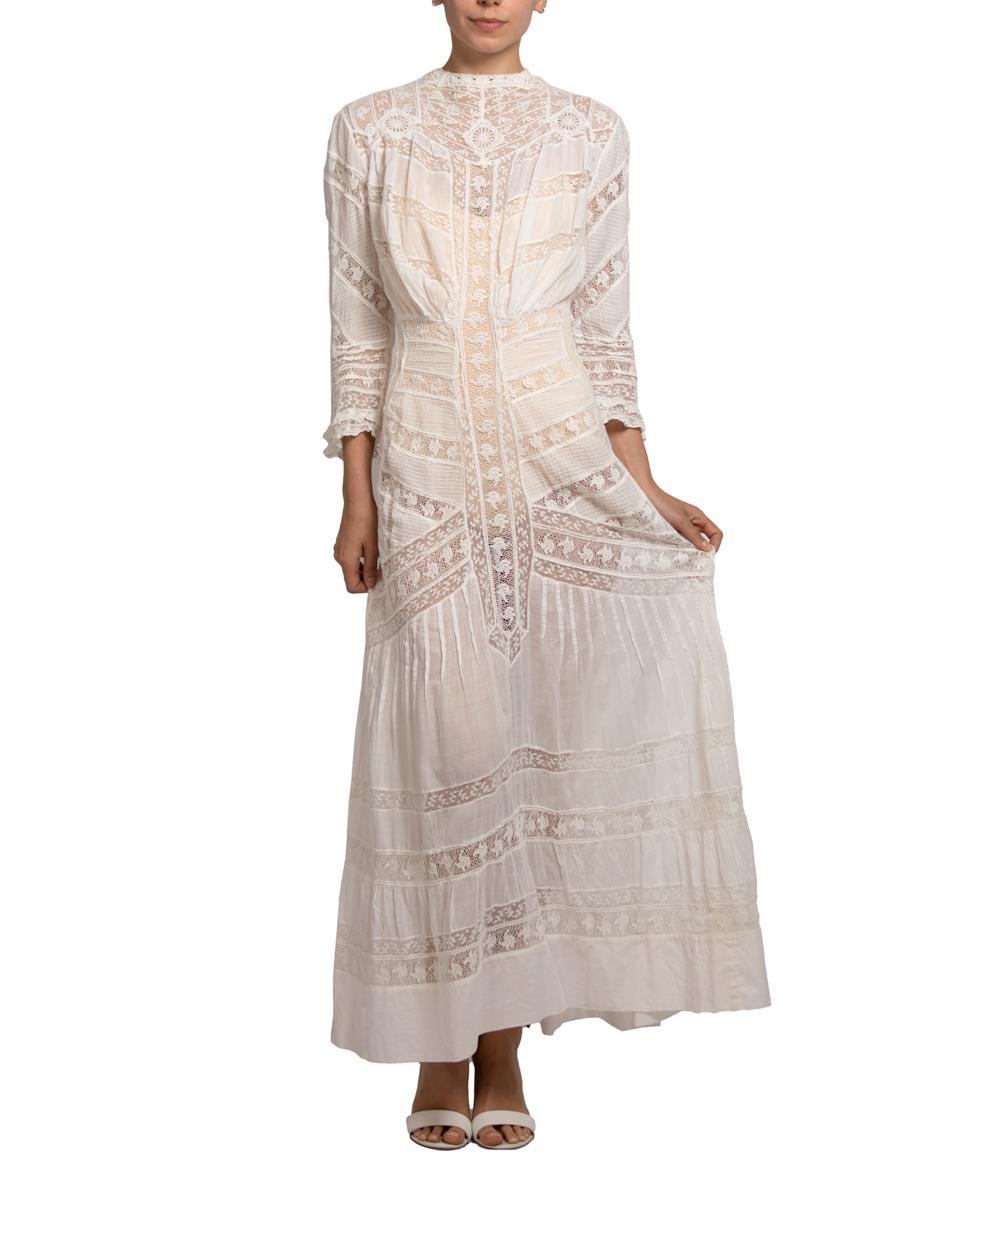 Victorian Cream Organic Cotton Lace Tea Dress With Sleeves For Sale 3